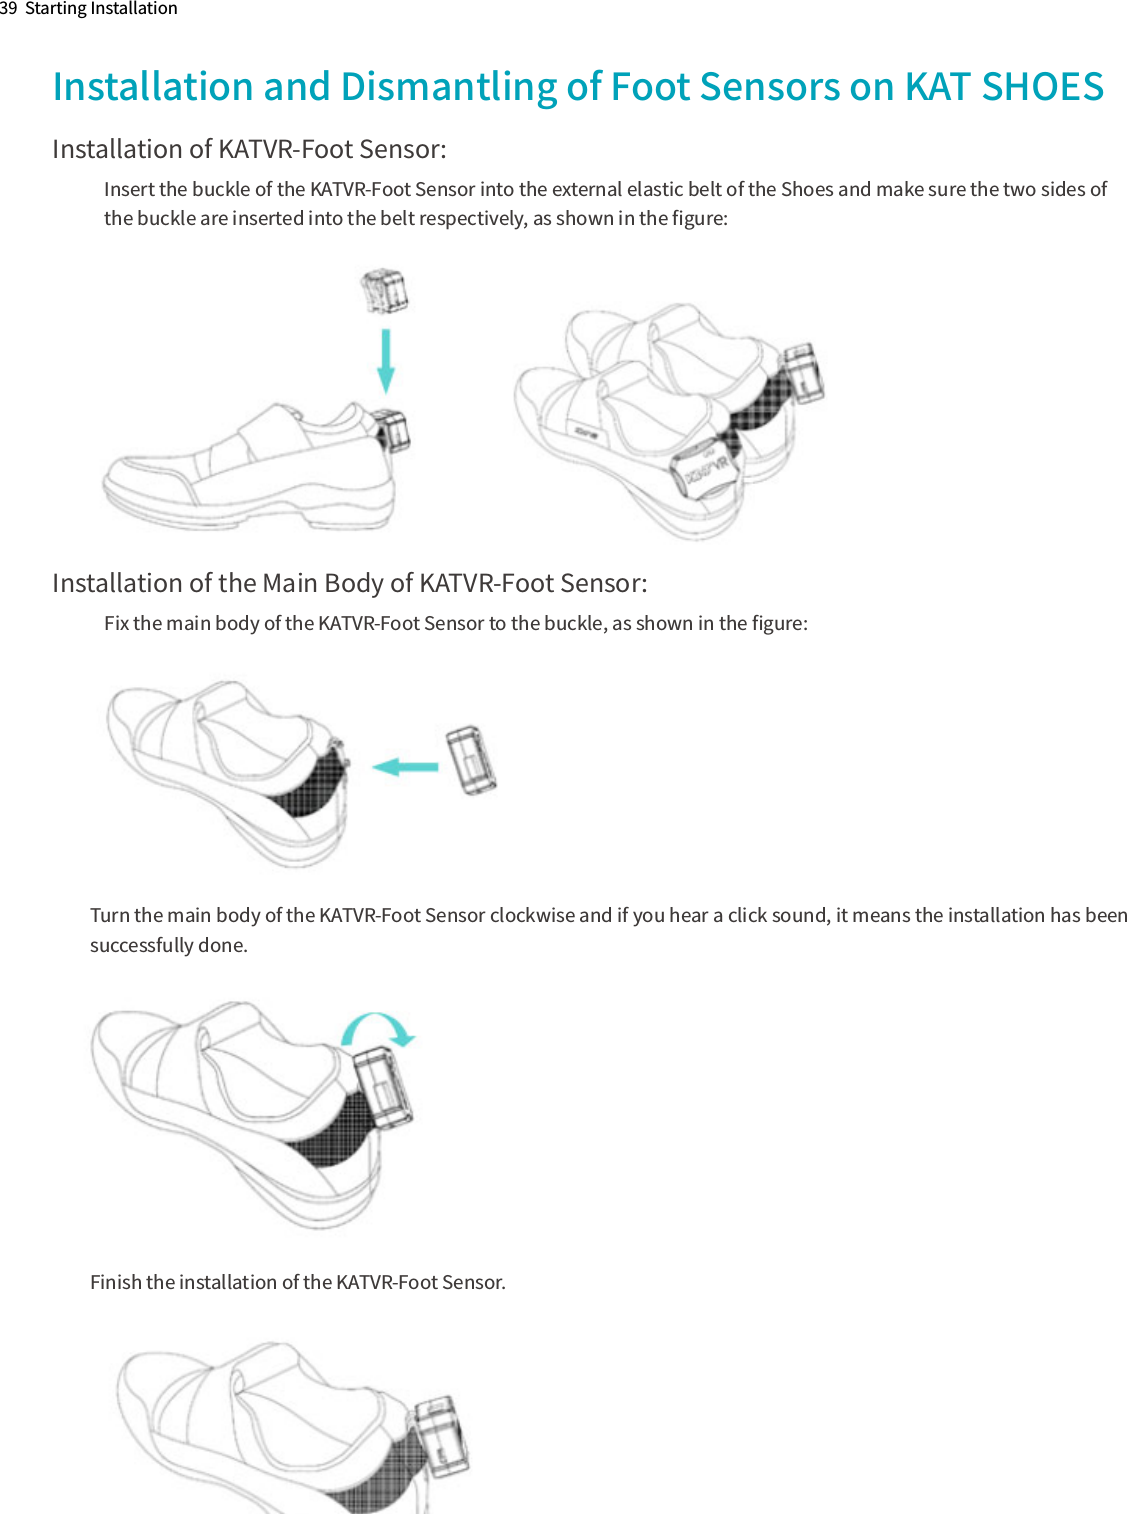 39  Starting InstallationInstallation and Dismantling of Foot Sensors on KAT SHOESInstallation of KATVR-Foot Sensor:Insert the buckle of the KATVR-Foot Sensor into the external elastic belt of the Shoes and make sure the two sides of the buckle are inserted into the belt respectively, as shown in the ﬁgure:Installation of the Main Body of KATVR-Foot Sensor:Fix the main body of the KATVR-Foot Sensor to the buckle, as shown in the ﬁgure:Turn the main body of the KATVR-Foot Sensor clockwise and if you hear a click sound, it means the installation has been  successfully done.Finish the installation of the KATVR-Foot Sensor.